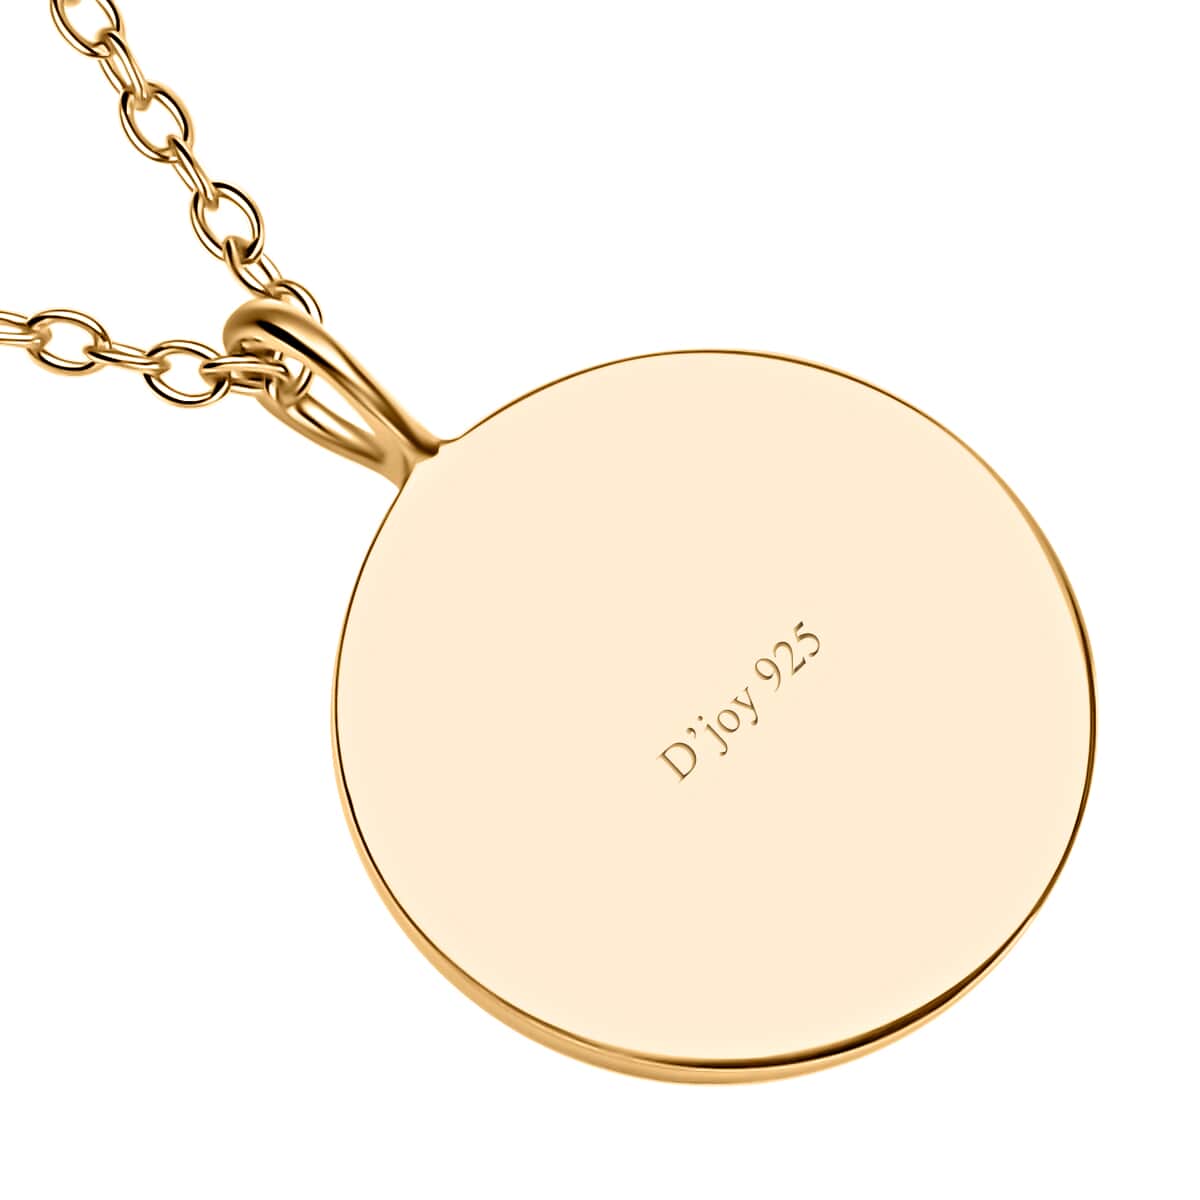 Dainty Pause Sign Pendant Necklace, 16-18 Inch Adjustable Necklace, 14K Yellow Gold Over Sterling Silver Pendant Necklace 3.90 Grams image number 5